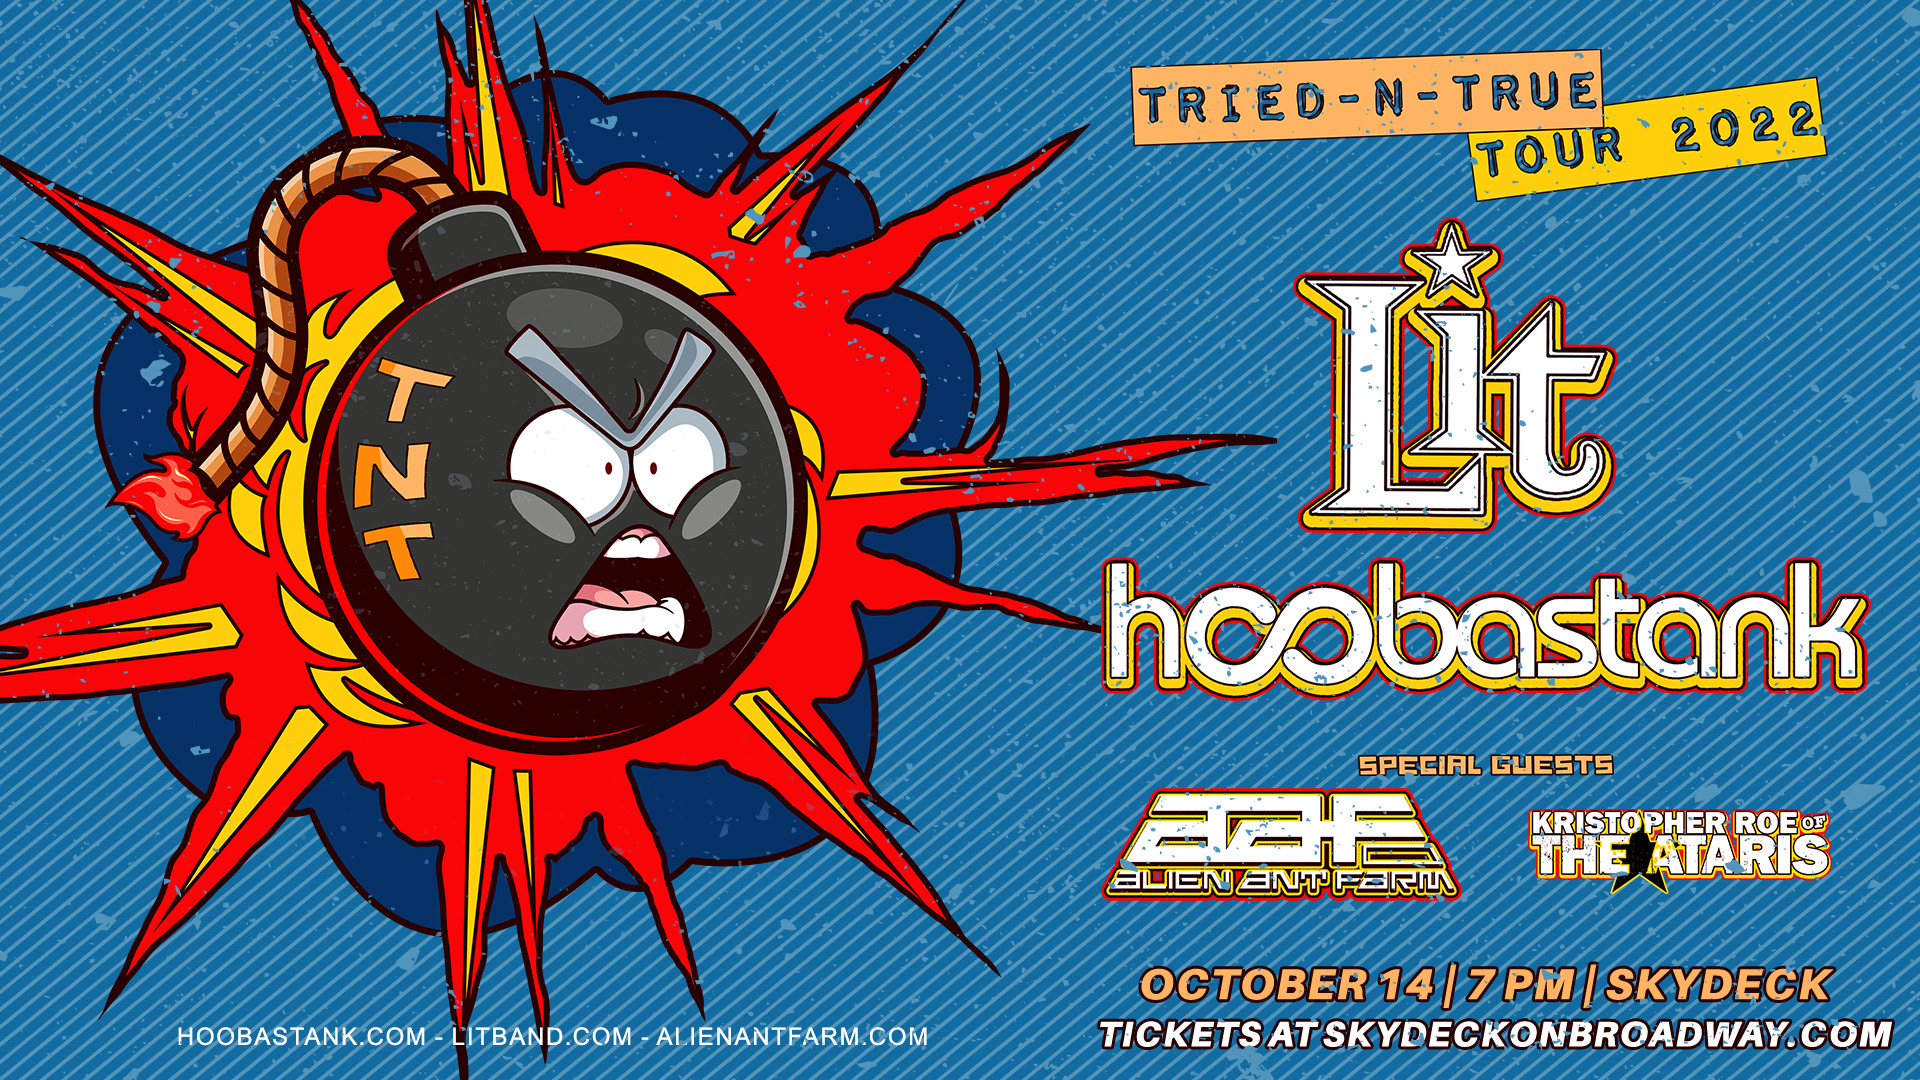 Lit & Hoobastank: Tried & True Tour with special guests Alien Ant Farm and Kris Roe of The Ataris - hero